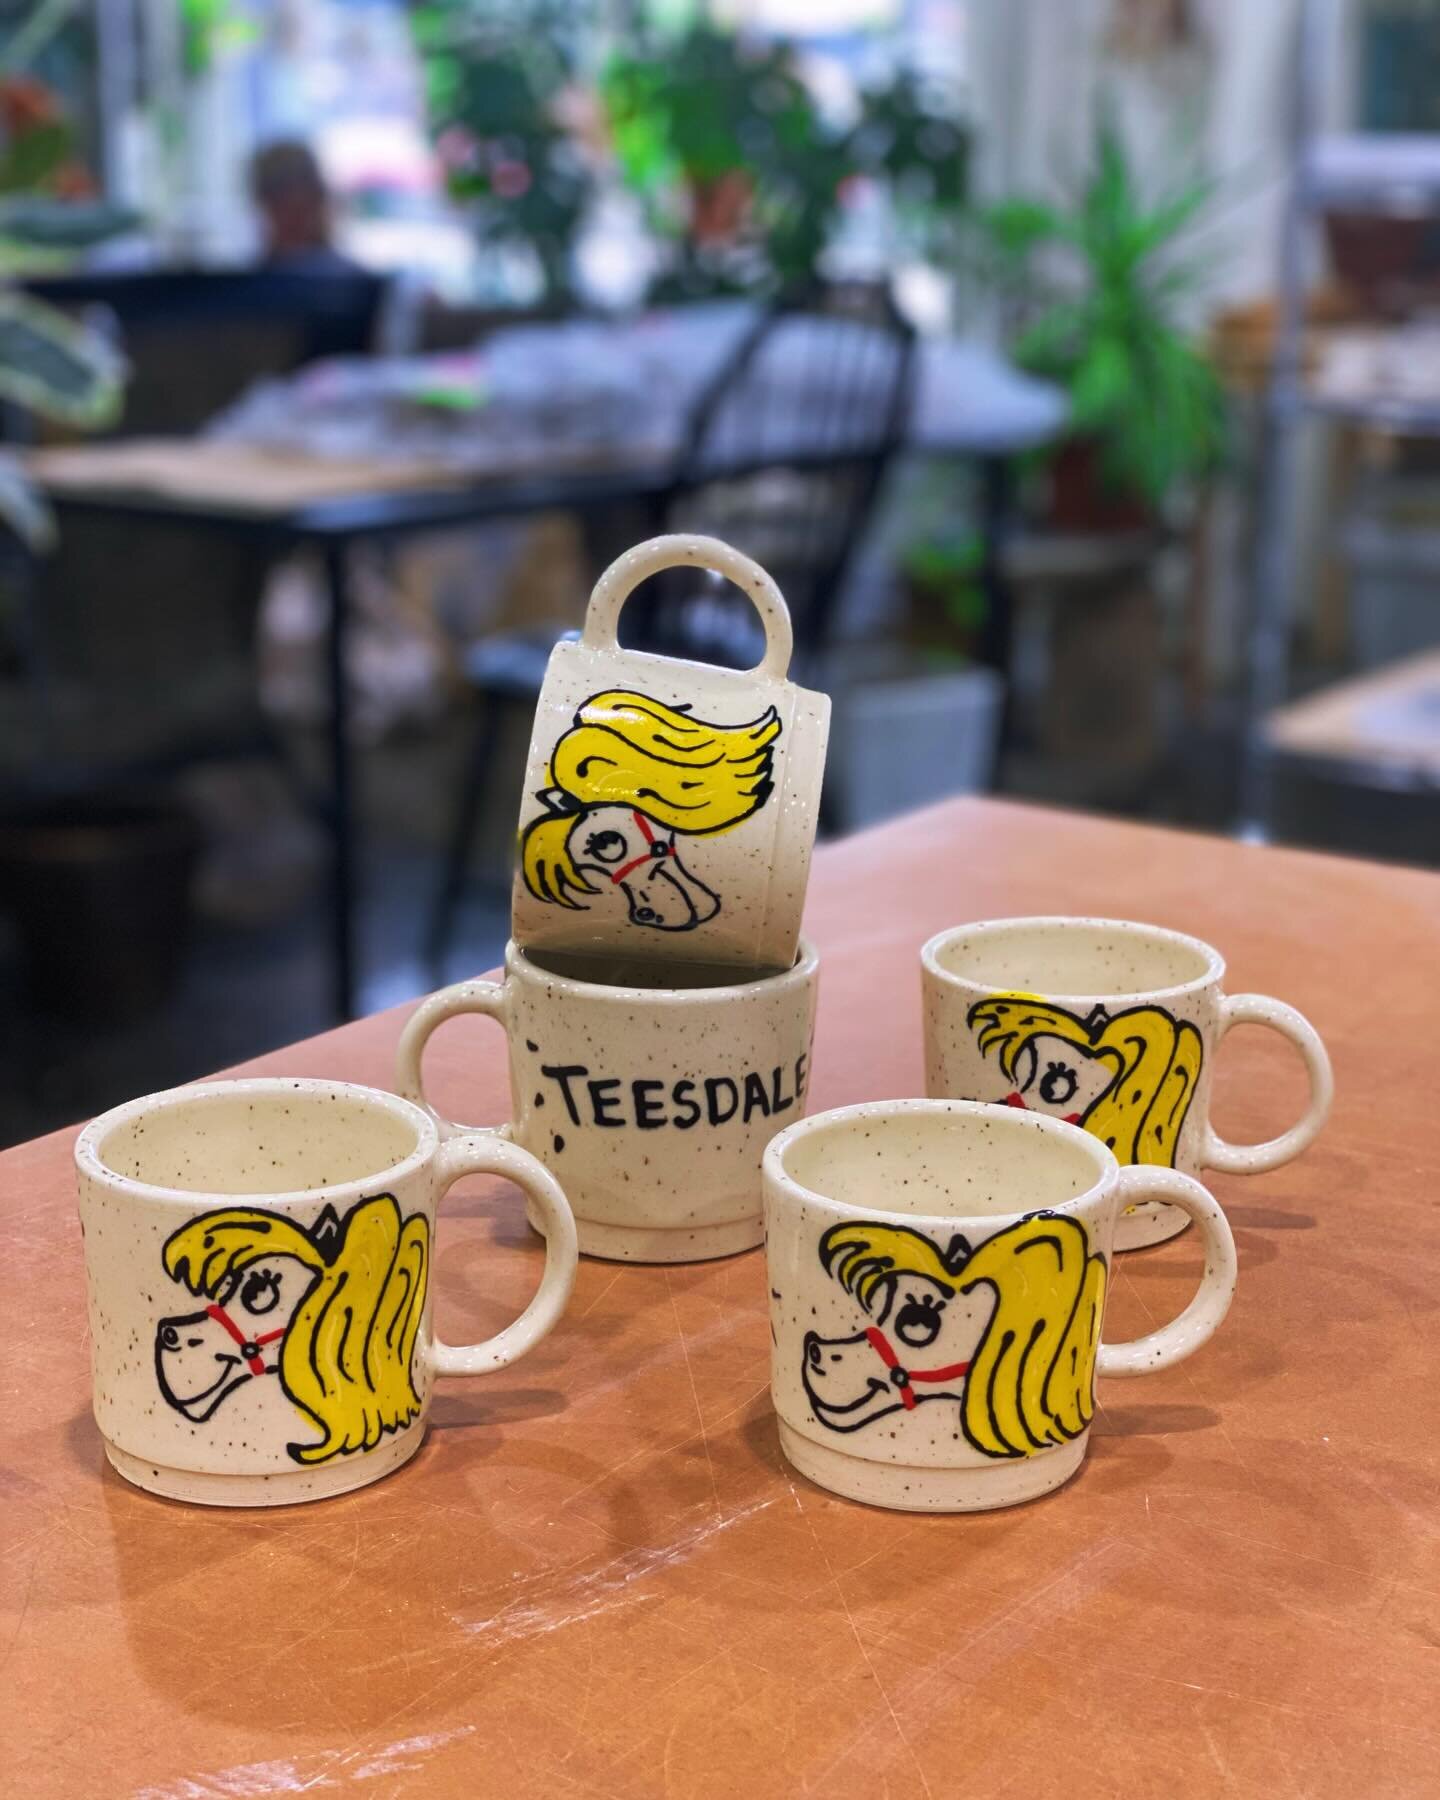 Happy #mugshotmondays with these cute horsey mugs that @motormouthceramics made for @teesdale.equestrian 🐴 #pottery #mudpotters #potteryyyc #yycpottery #localpottery #ceramics #clayworks #kiln #calgarypottery #calgarylocalbusiness #yycpotterystudio 